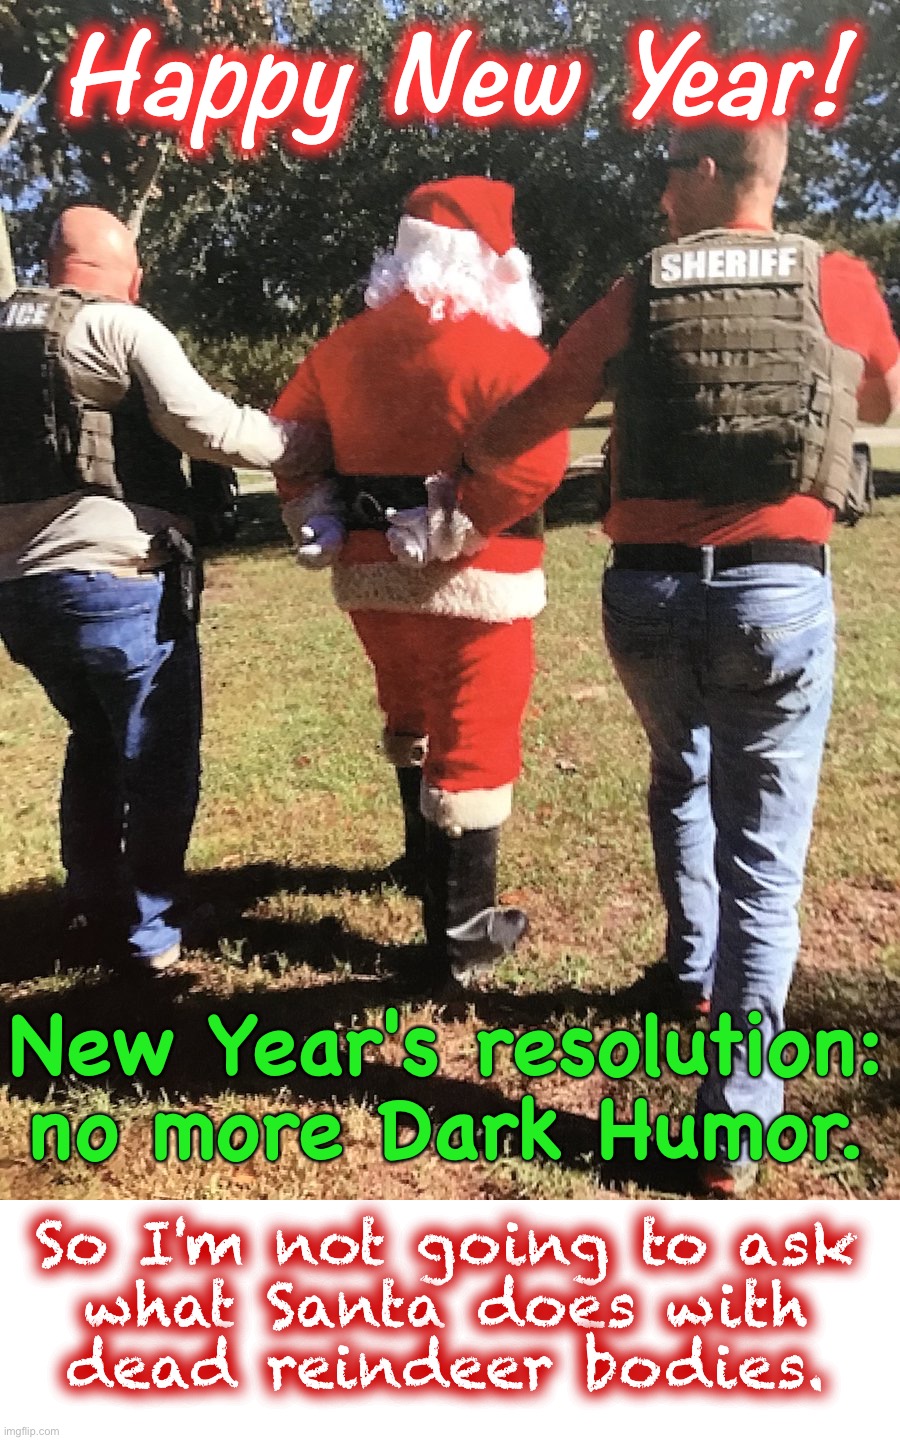 HAPPY NEW YEAR!! | Happy  New  Year! New Year's resolution:
no more Dark Humor. So I'm not going to ask
what Santa does with
dead reindeer bodies. | image tagged in santa busted,santa claus,dark humor,christmas,happy new year,rick75230 | made w/ Imgflip meme maker